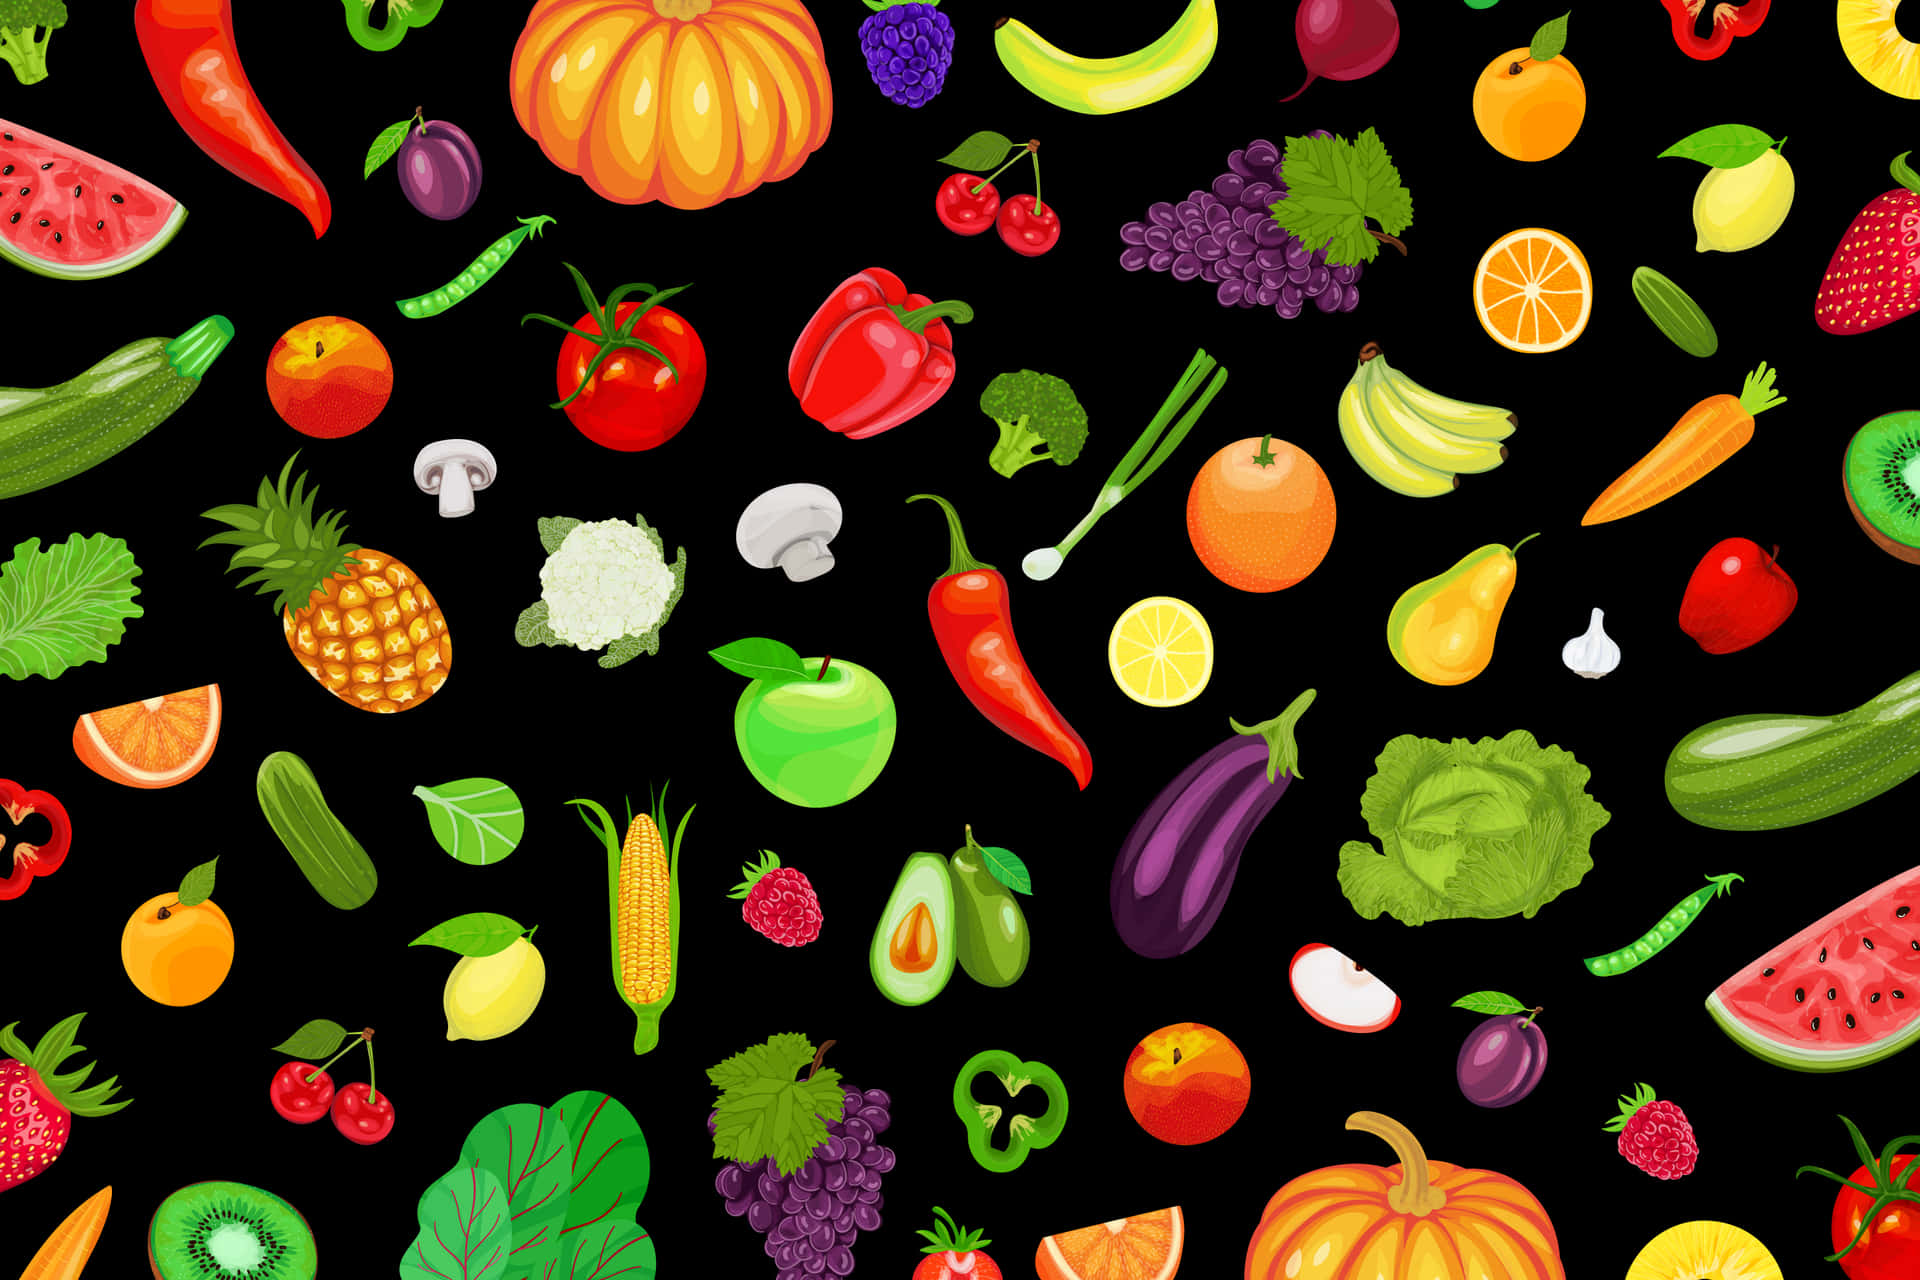 Fruits And Vegetables Pictures